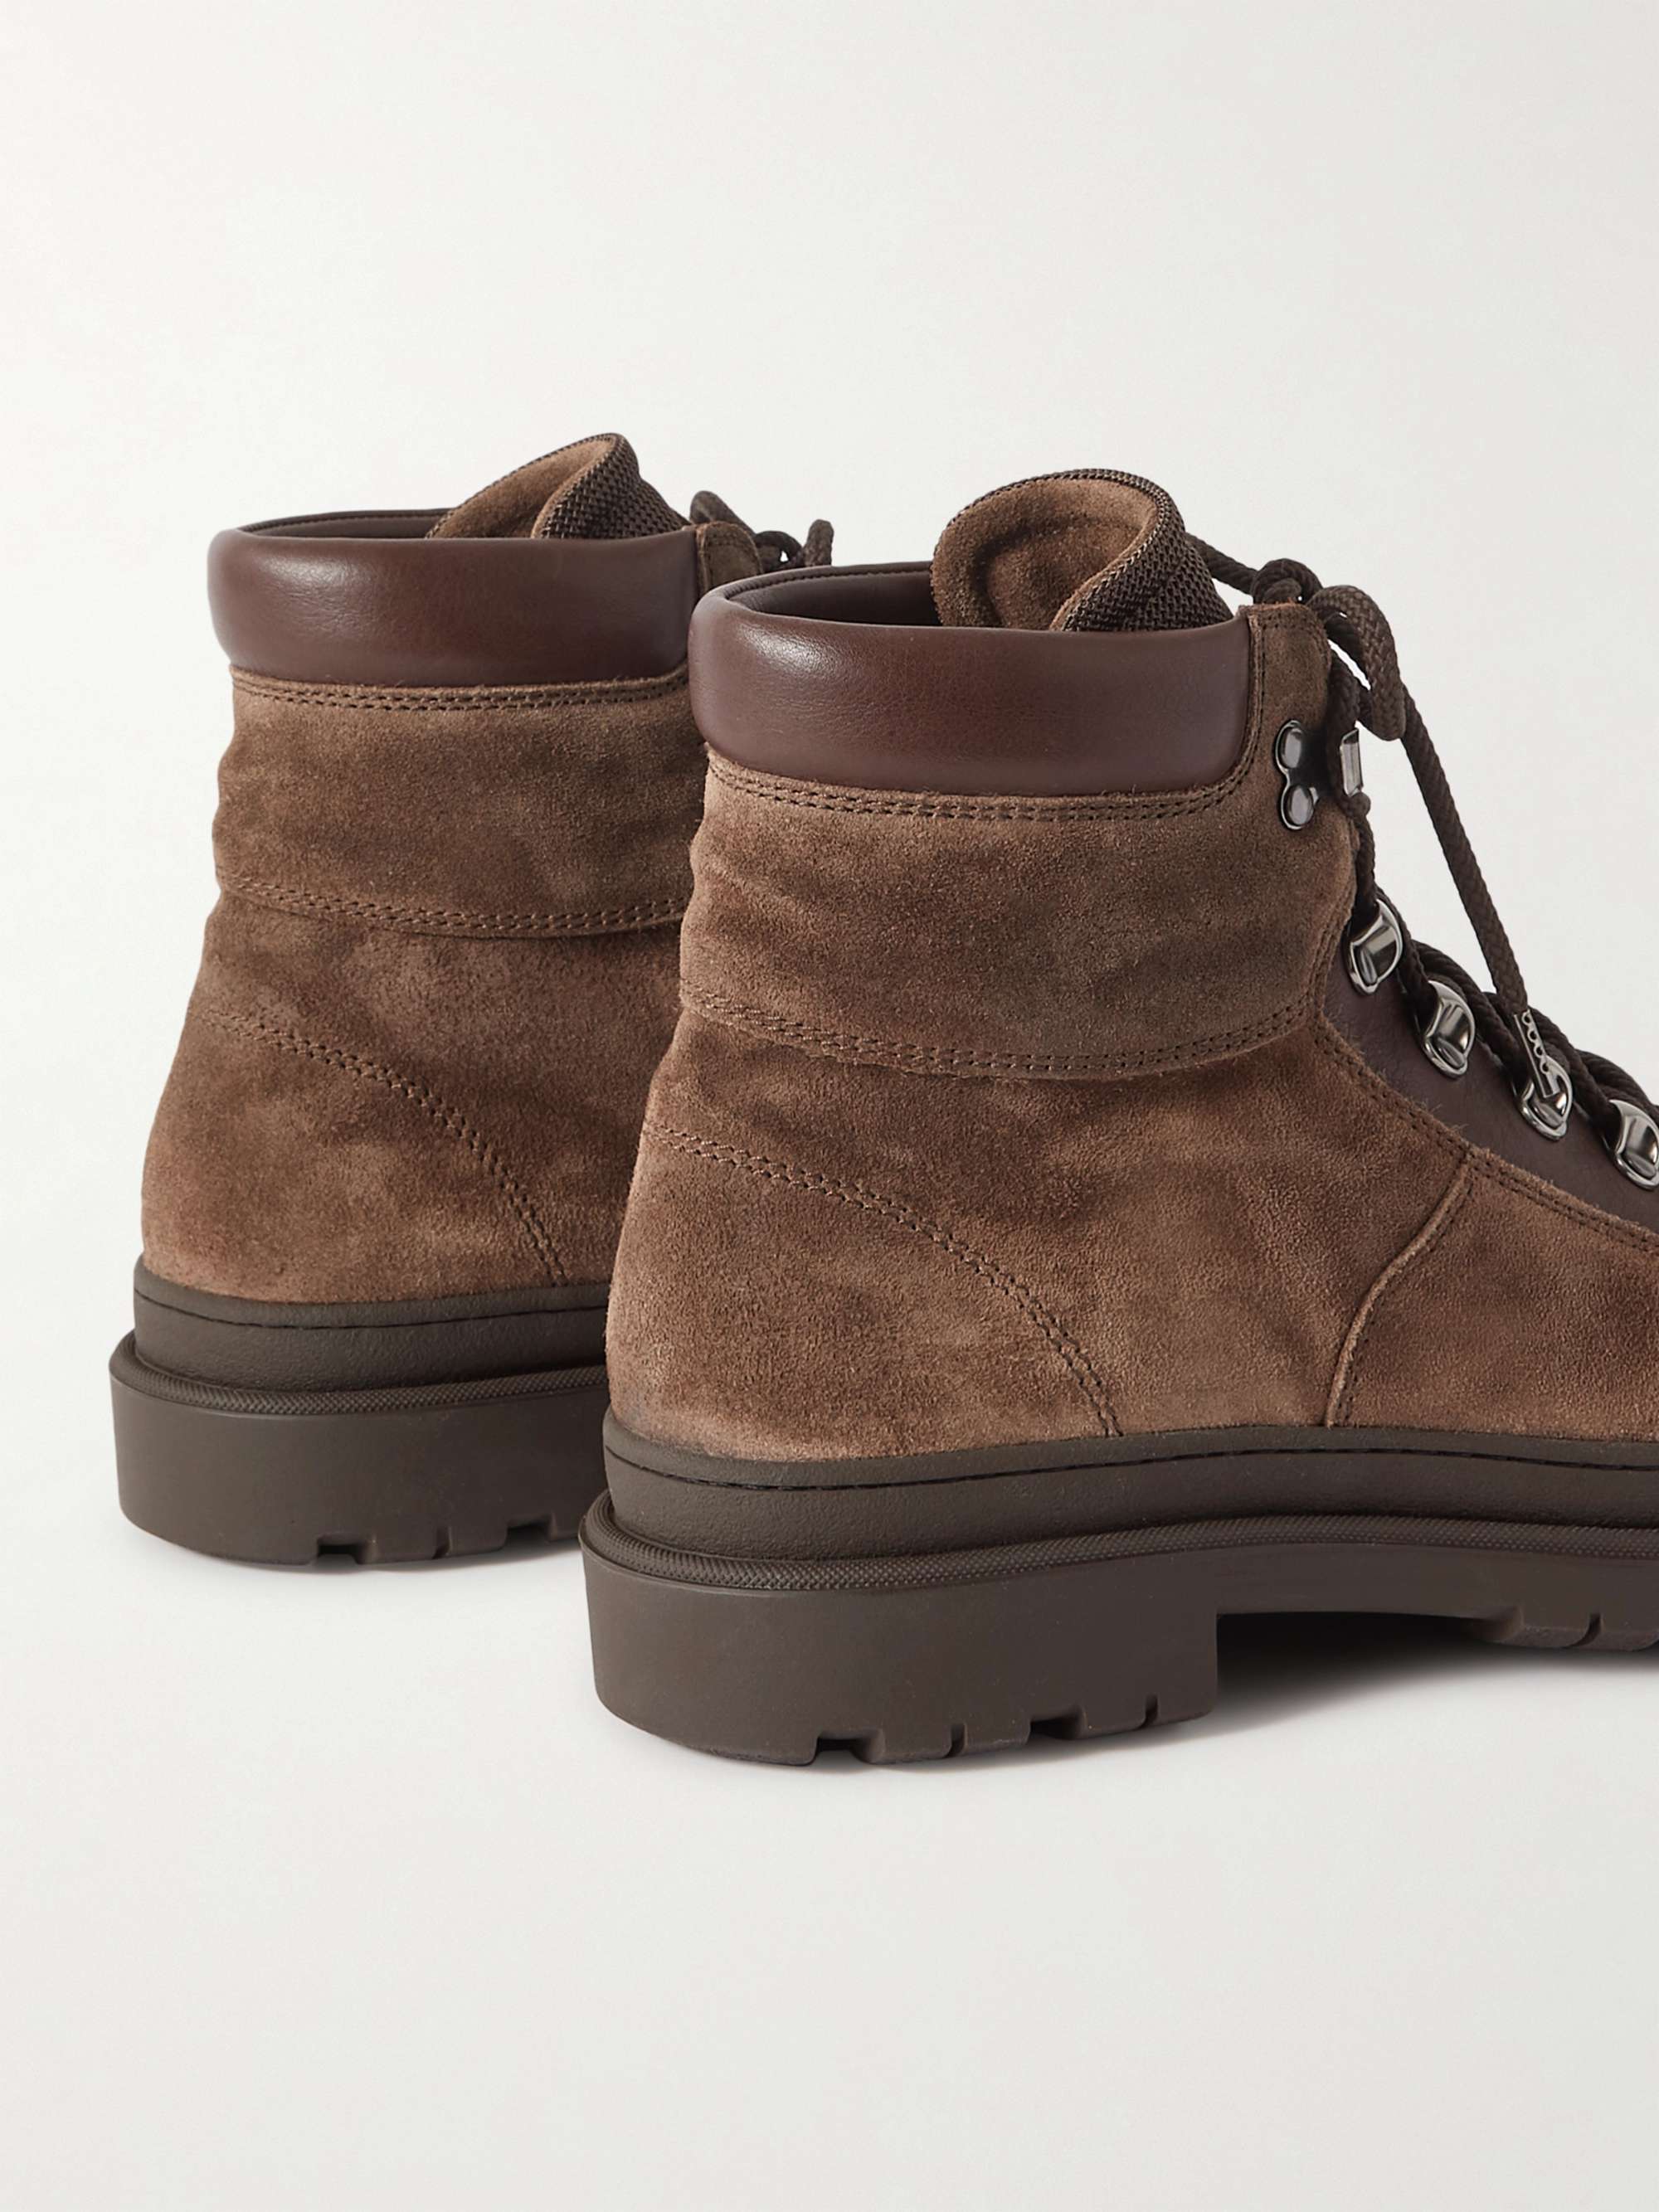 BRUNELLO CUCINELLI Leather-Trimmed Suede Boots